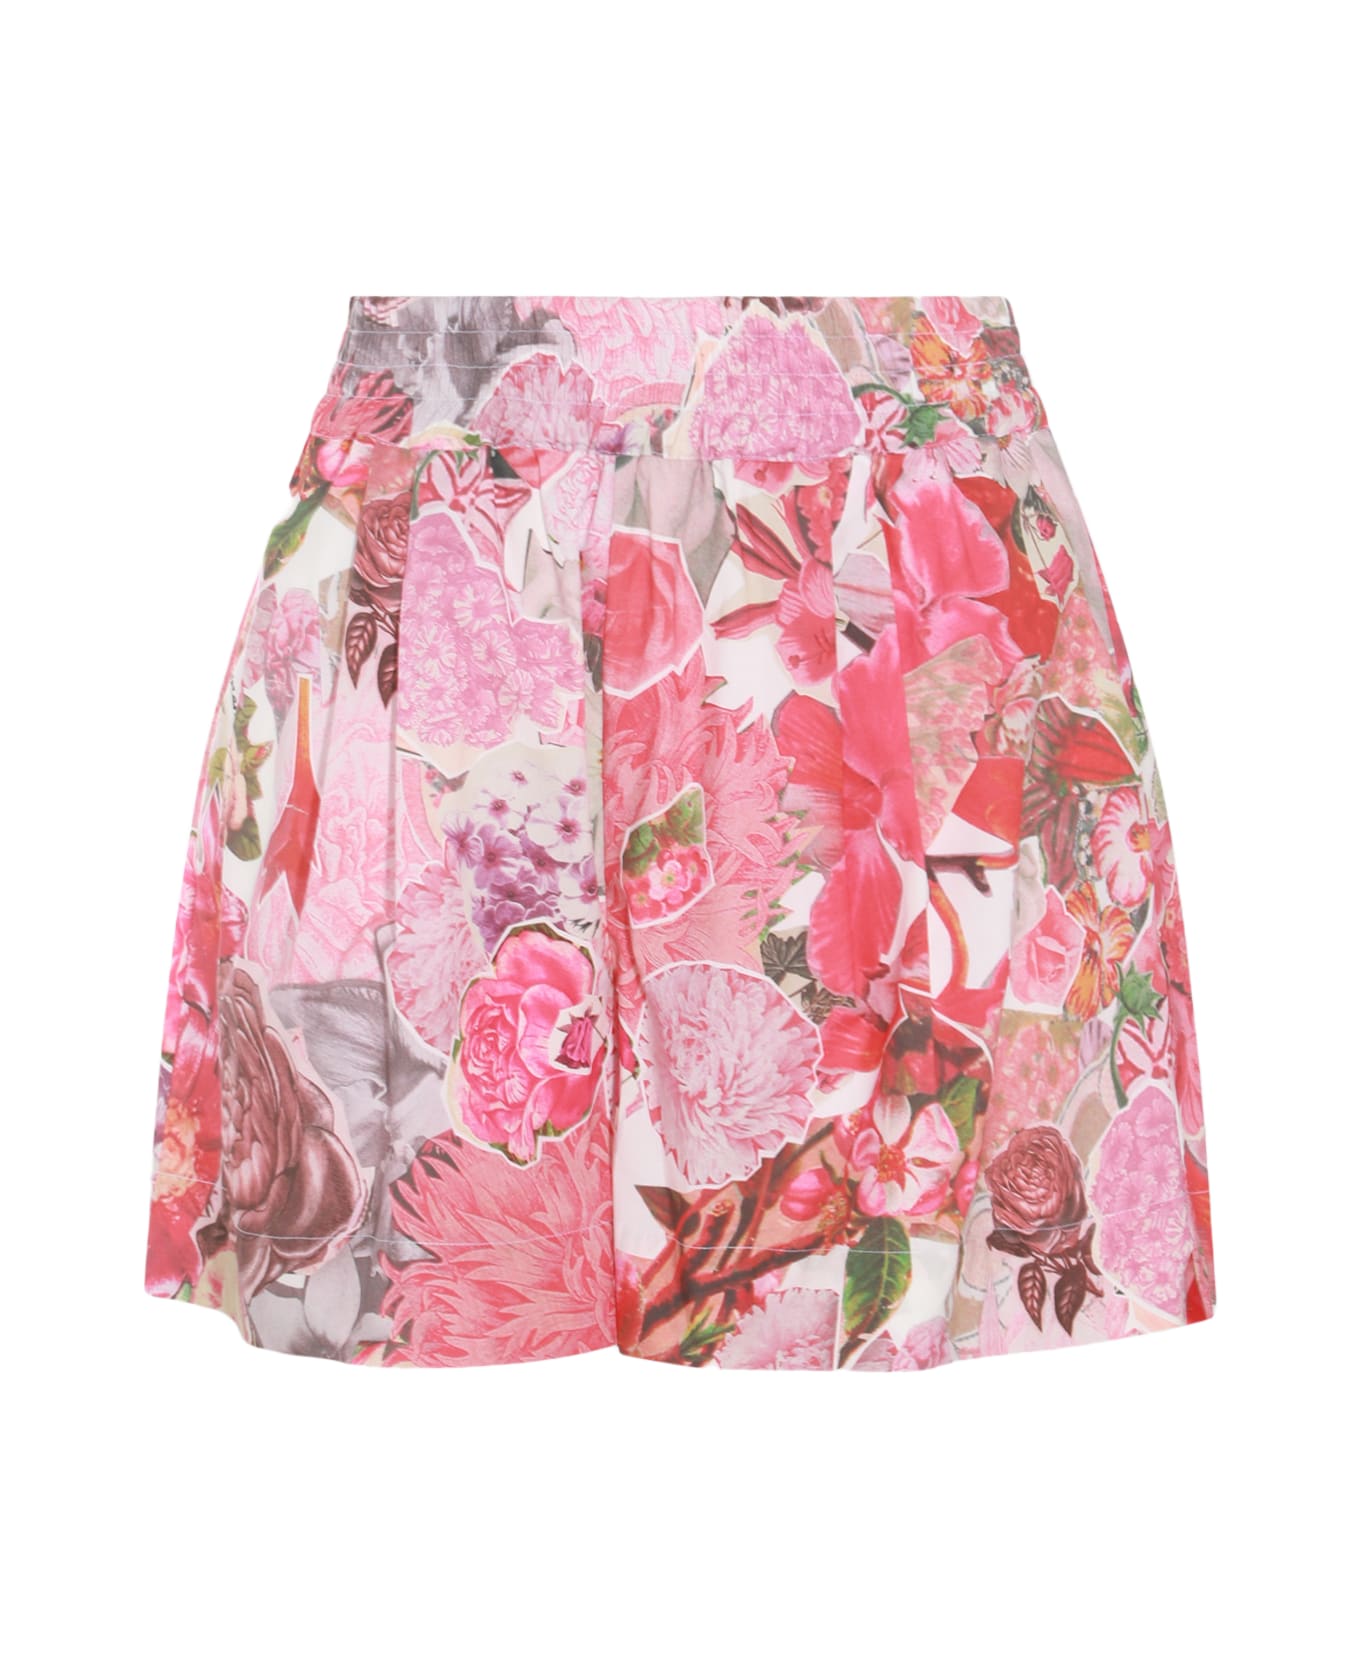 Marni Multicolor Cotton Shorts - PINK CLEMATIS